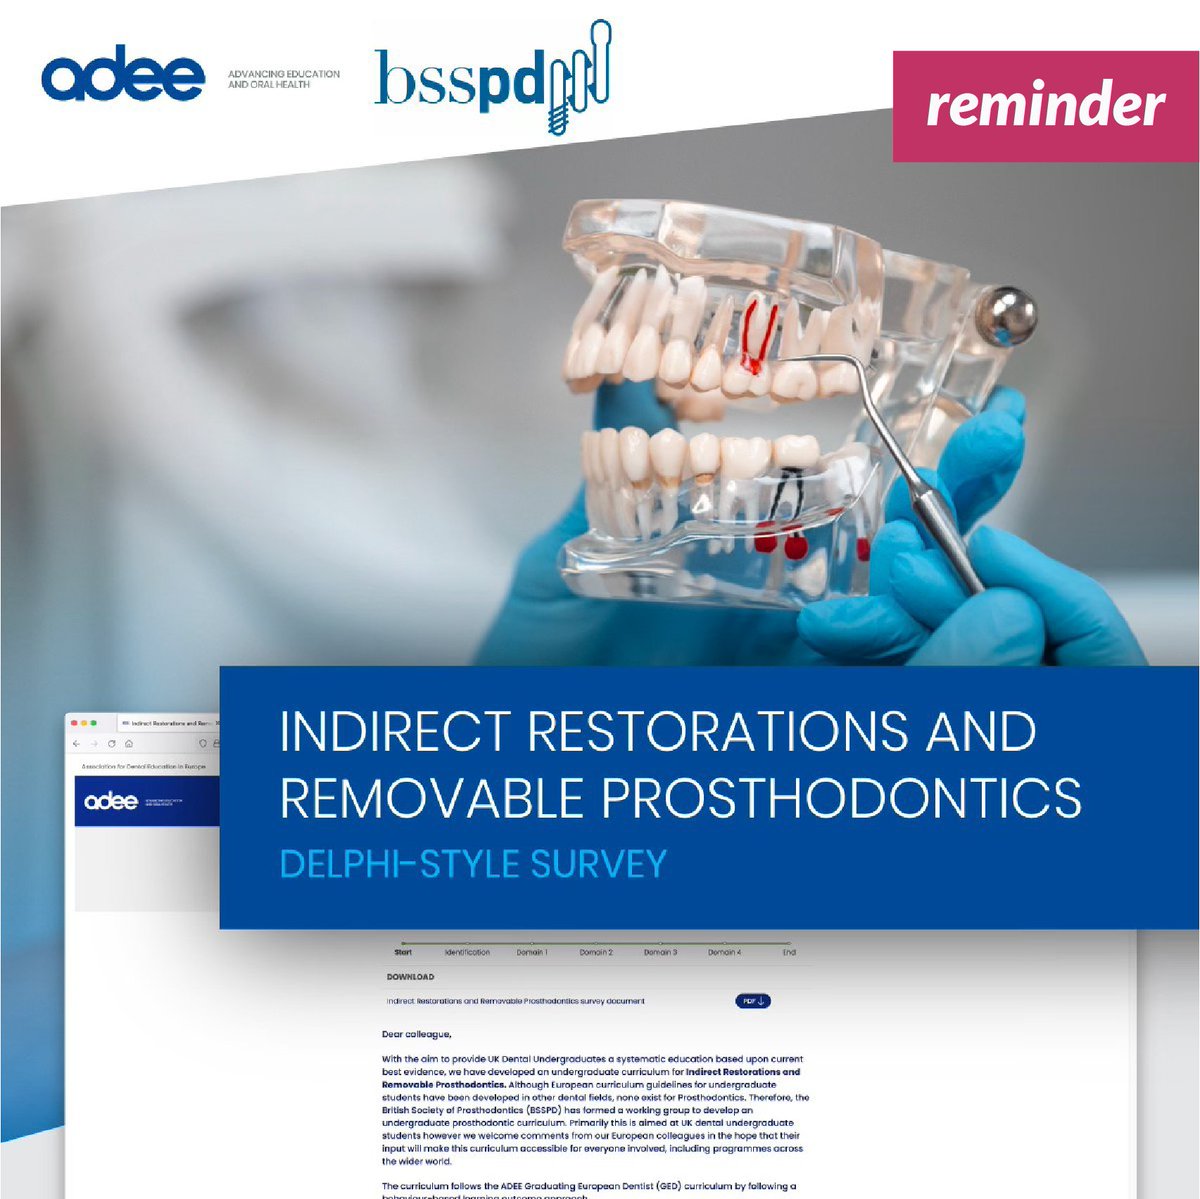 Reminder: Join the dental education revolution with BSSPD! Take our survey on Indirect Restorations and Removable Prosthodontics: adee.org/indirect-resto… #Adee #ElevateDentalEd #BSSPDRevolution #GlobalDentalInsights #Prosthodontics #Proscurriculum